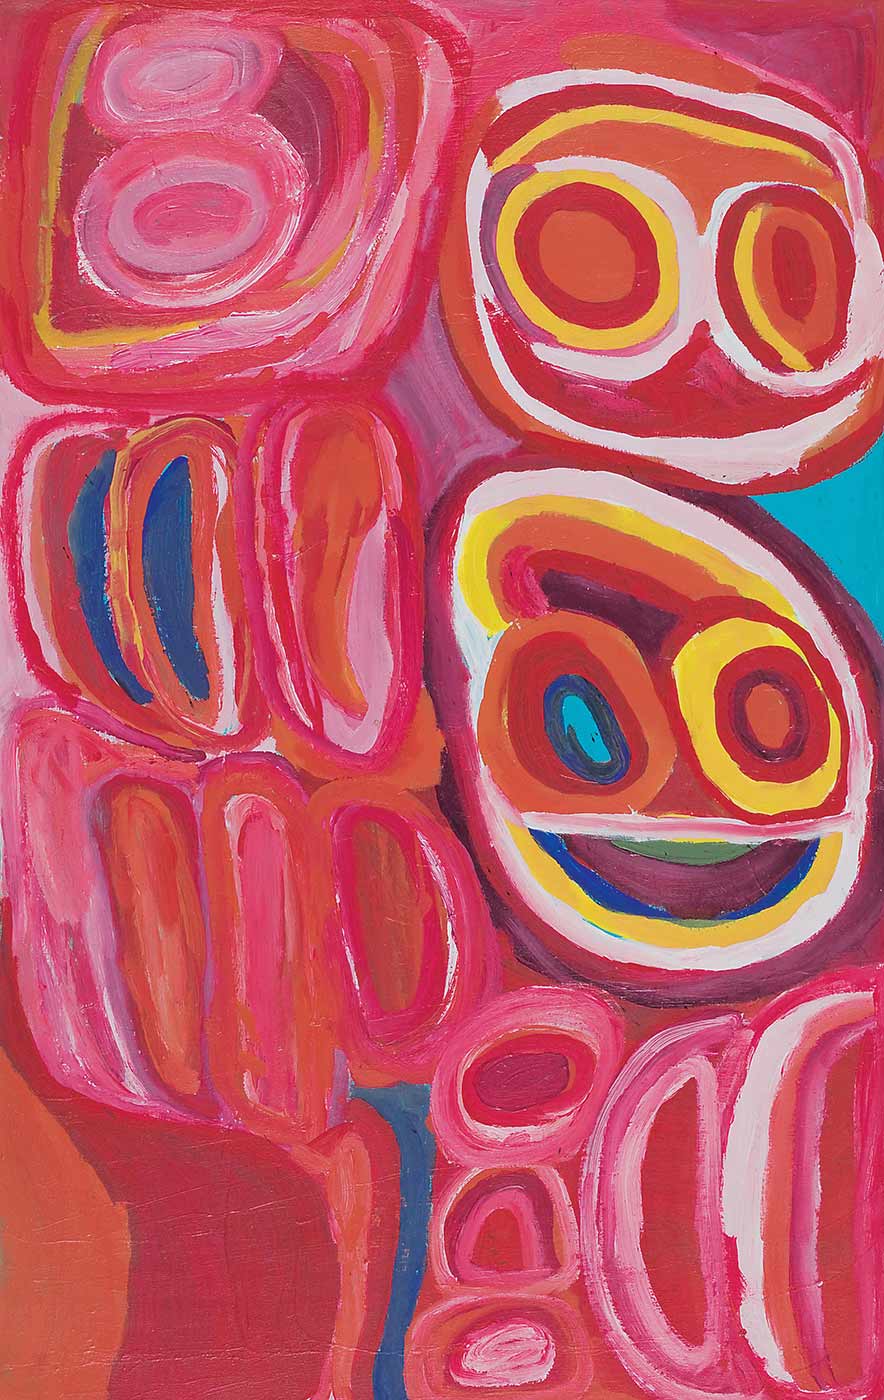 A dark pink toned painting on canvas with a face like motif in green, yellow, orange, purple, pink and blue to the right side. Above this there is a circle with two concentric circles within it side by side, in pink, red, and yellow. The left side and lower section of the painting is filled with pink, red, purple and blue concentric shapes with an orange squarish shape in the bottom left corner. - click to view larger image